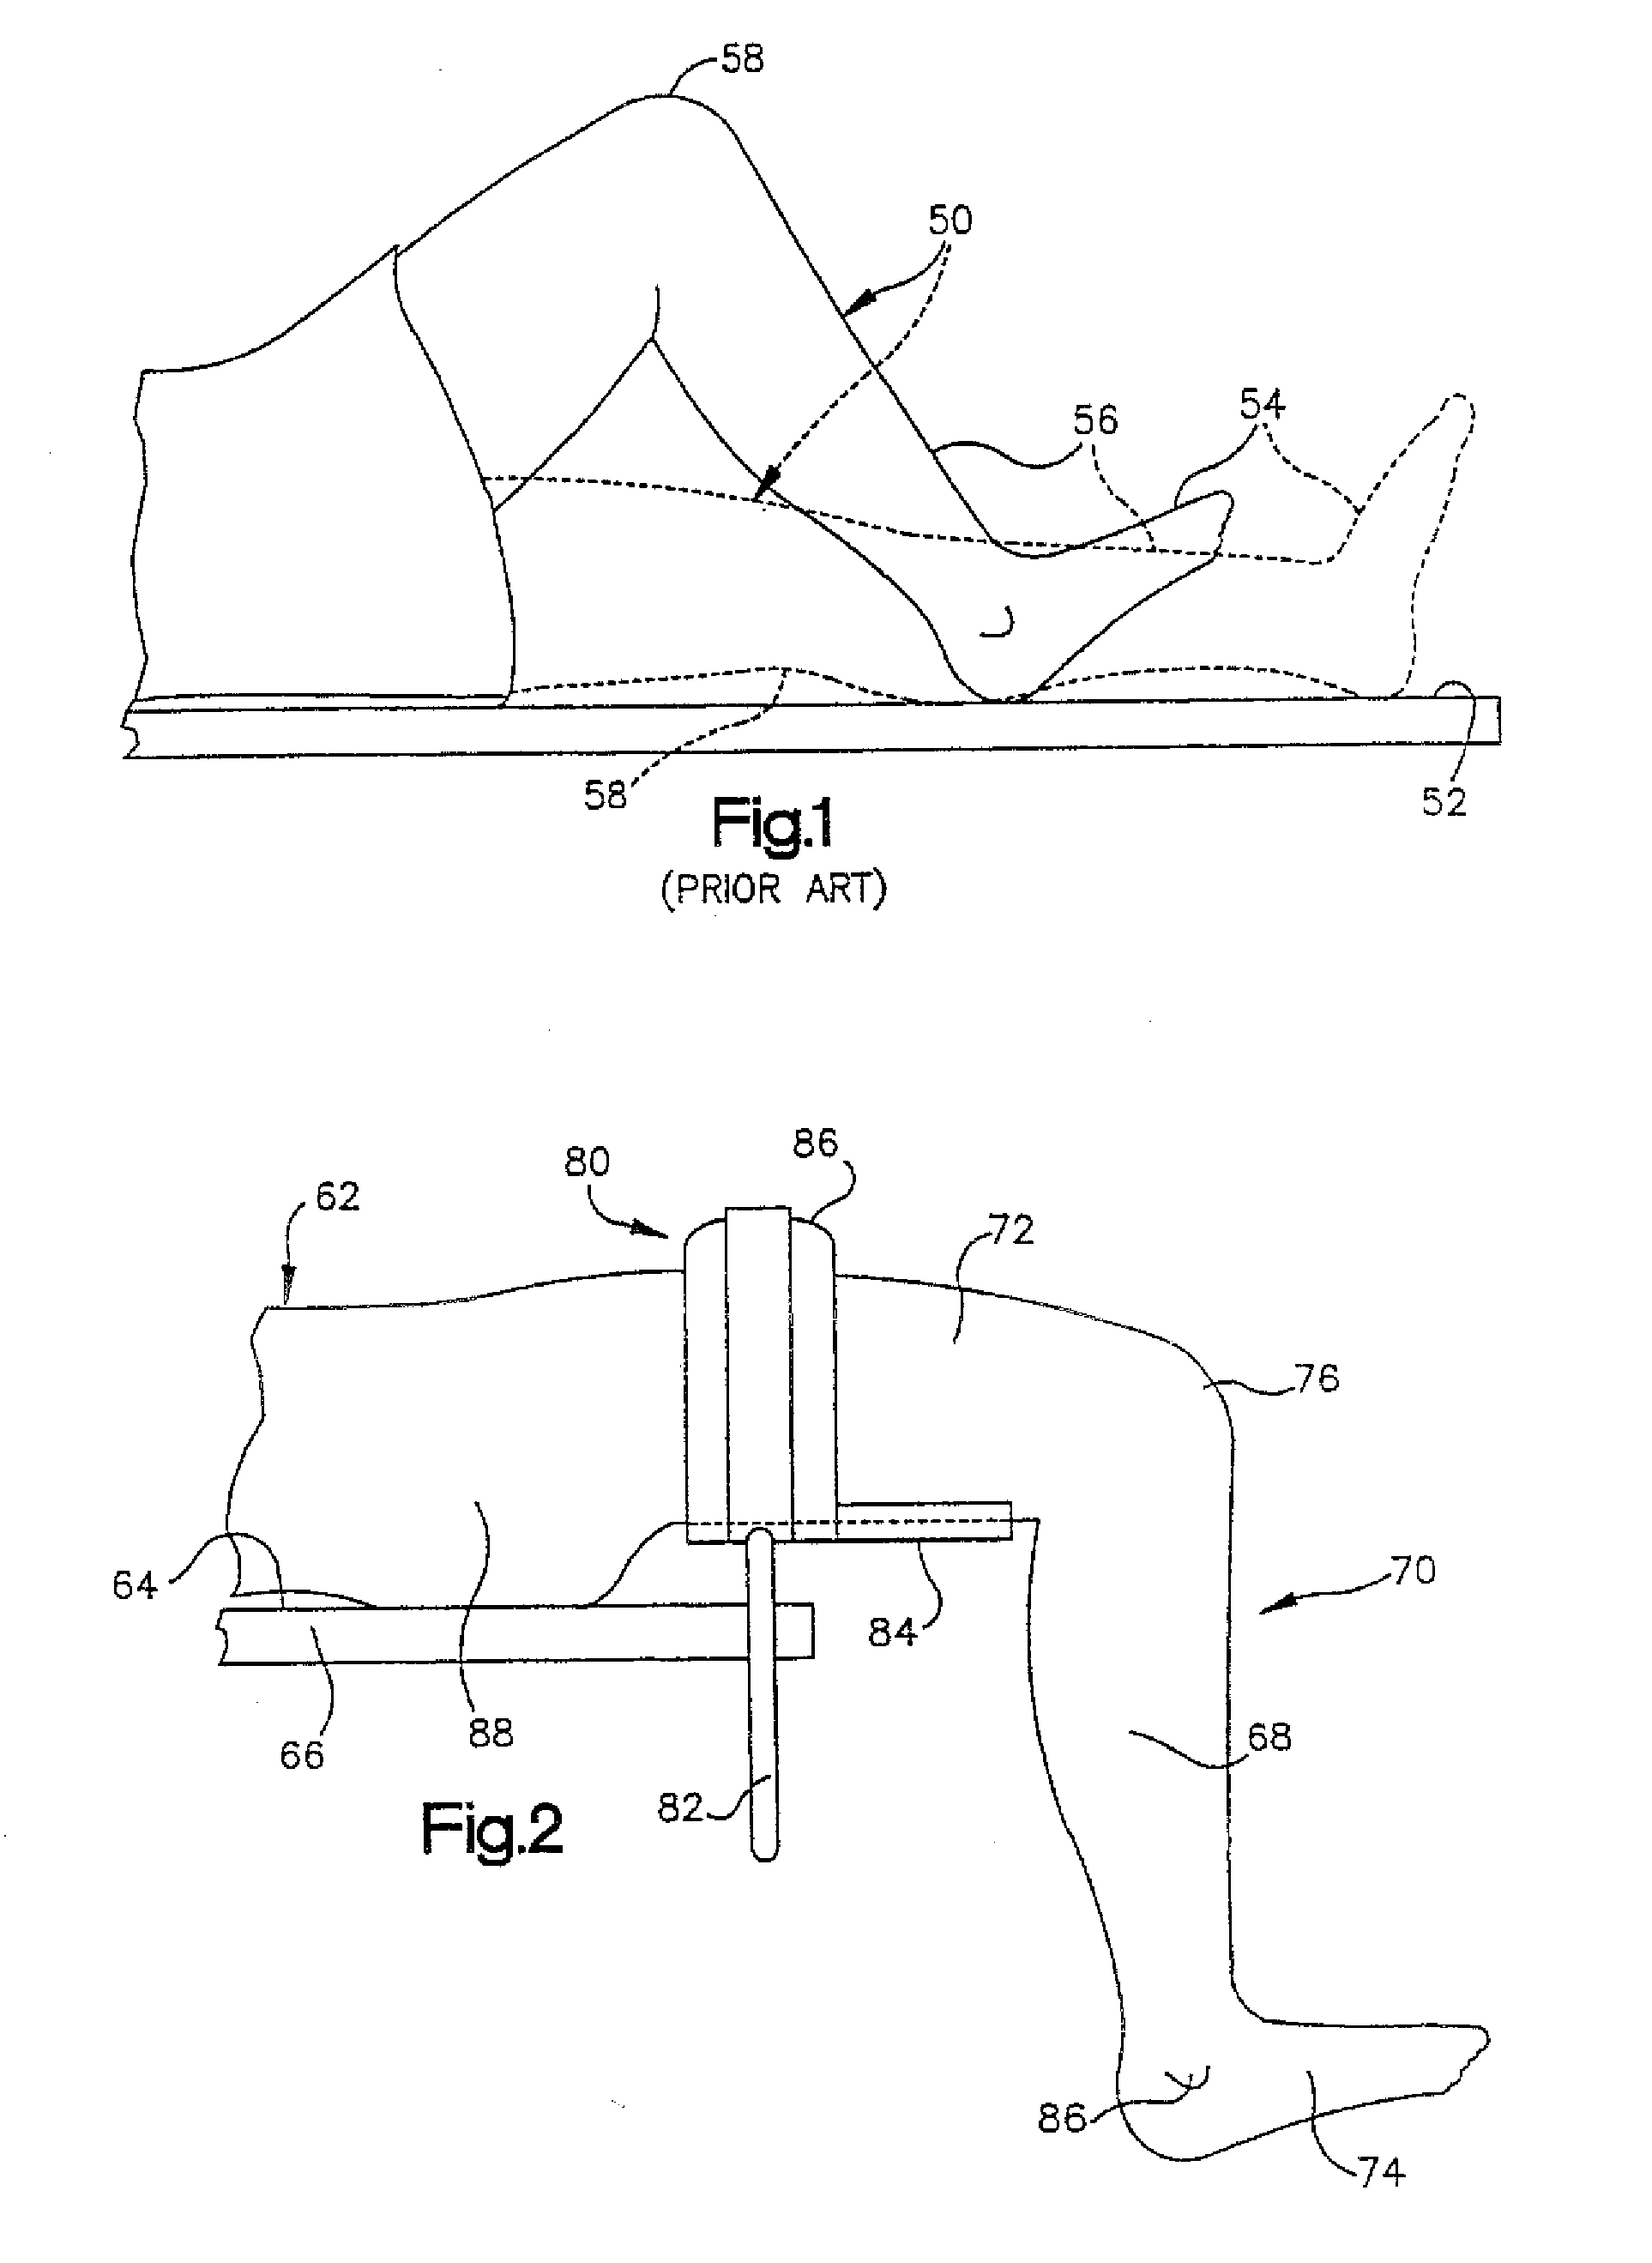 Minimally Invasive Surgical Systems and Methods